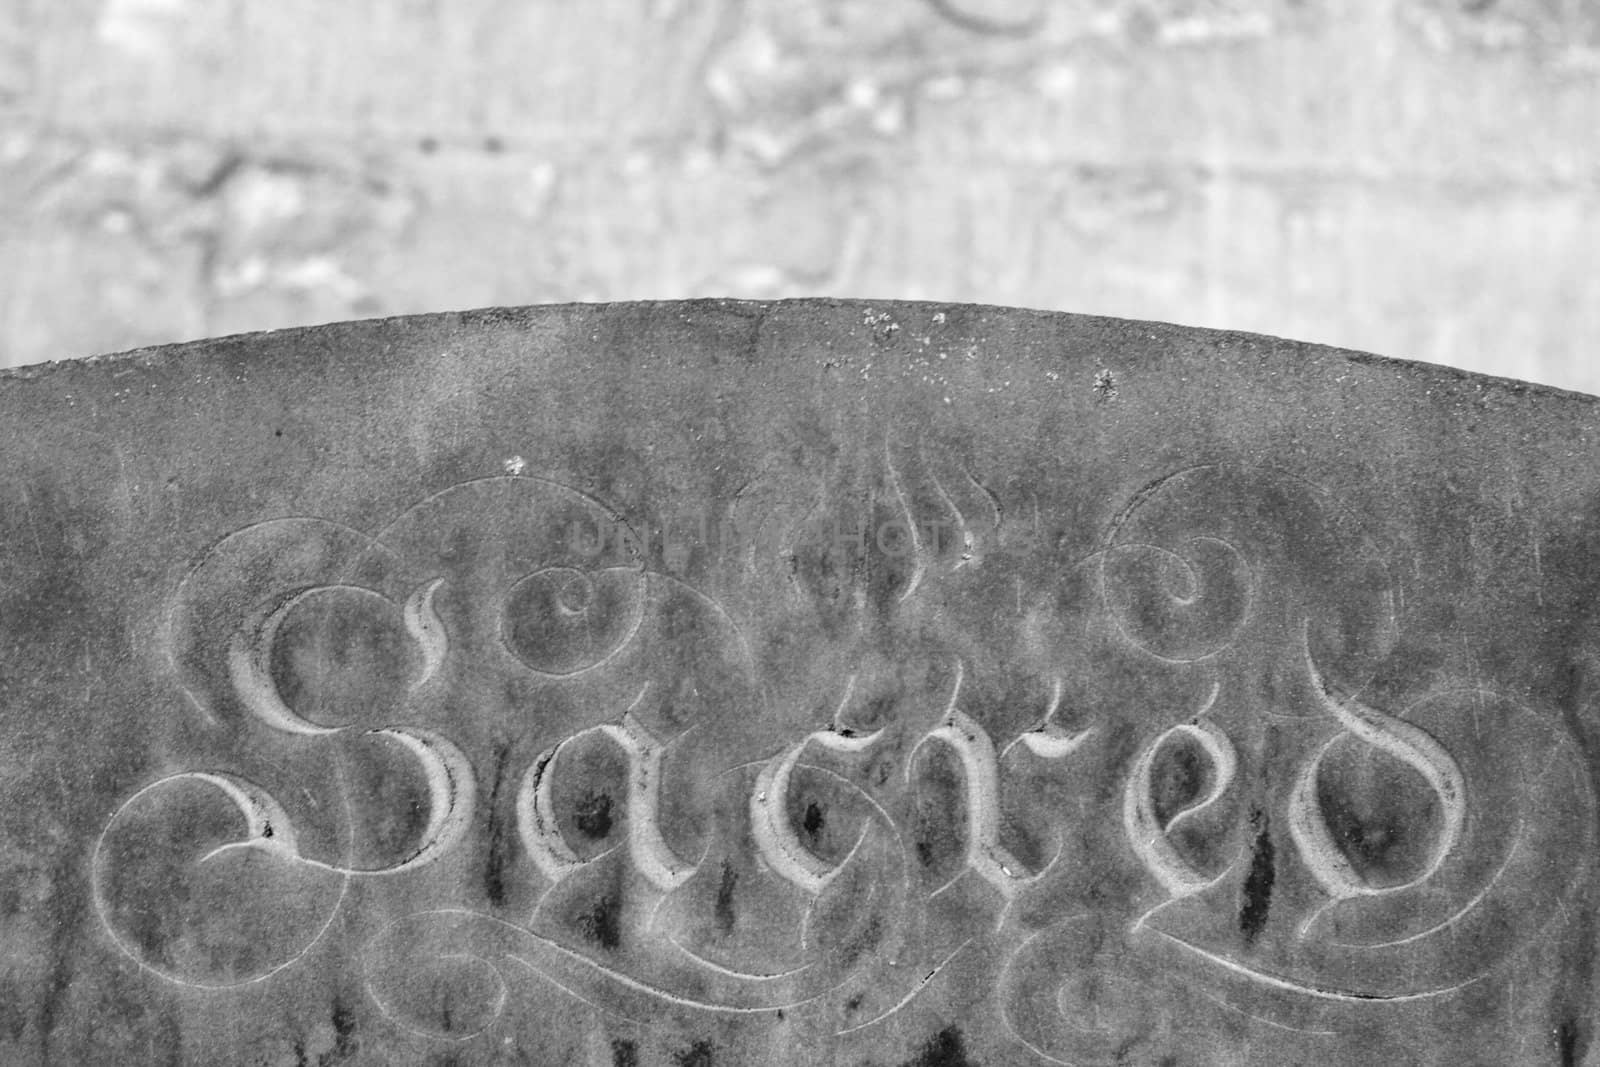 black and white image of a grave stone with the word "sacred" lot of stone texture visible